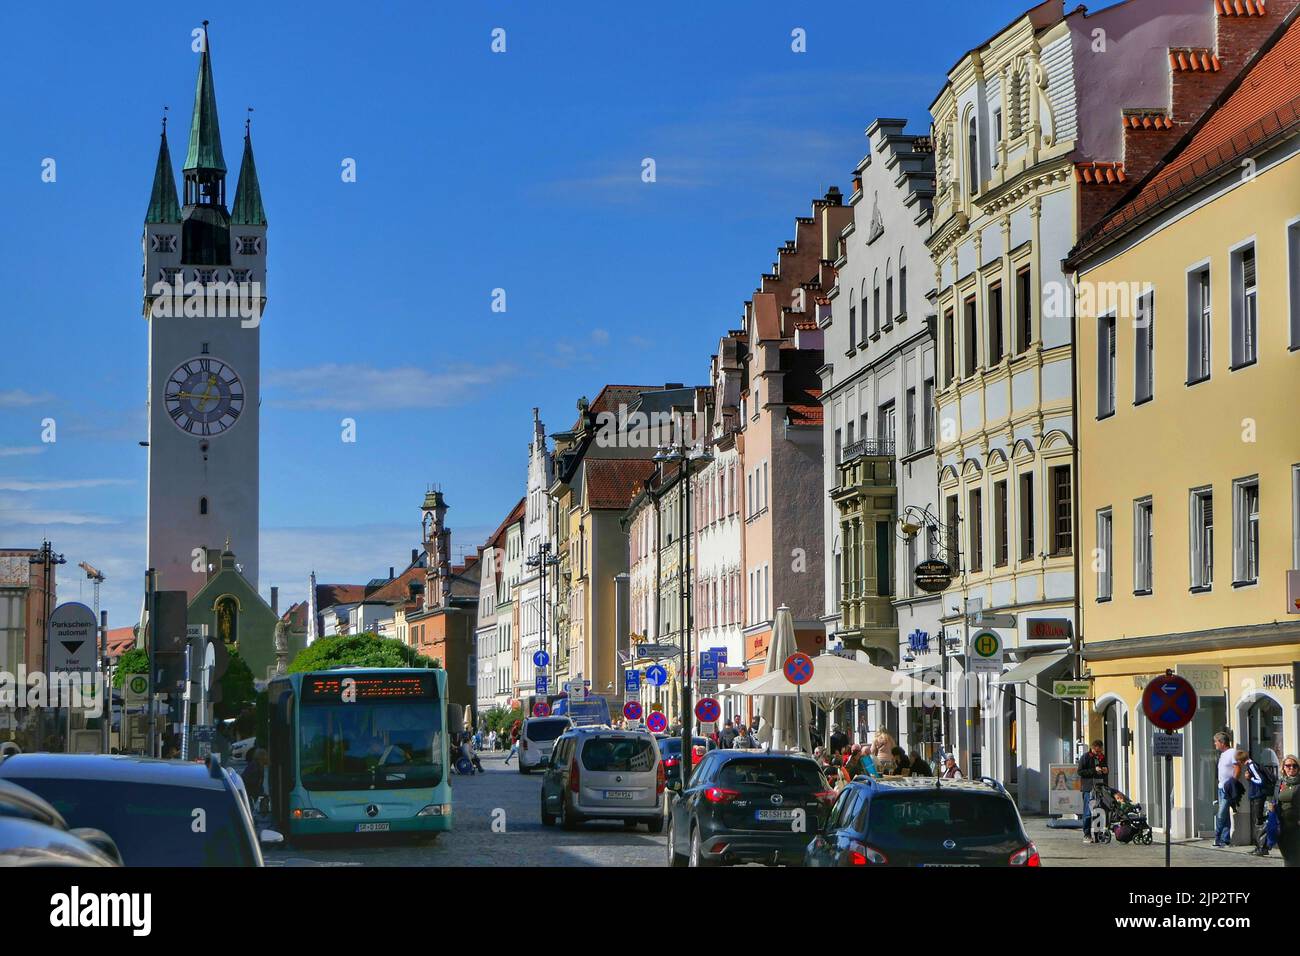 Picture shows Street and Cityphotography of Straubing in Bavaria, Germany Stock Photo